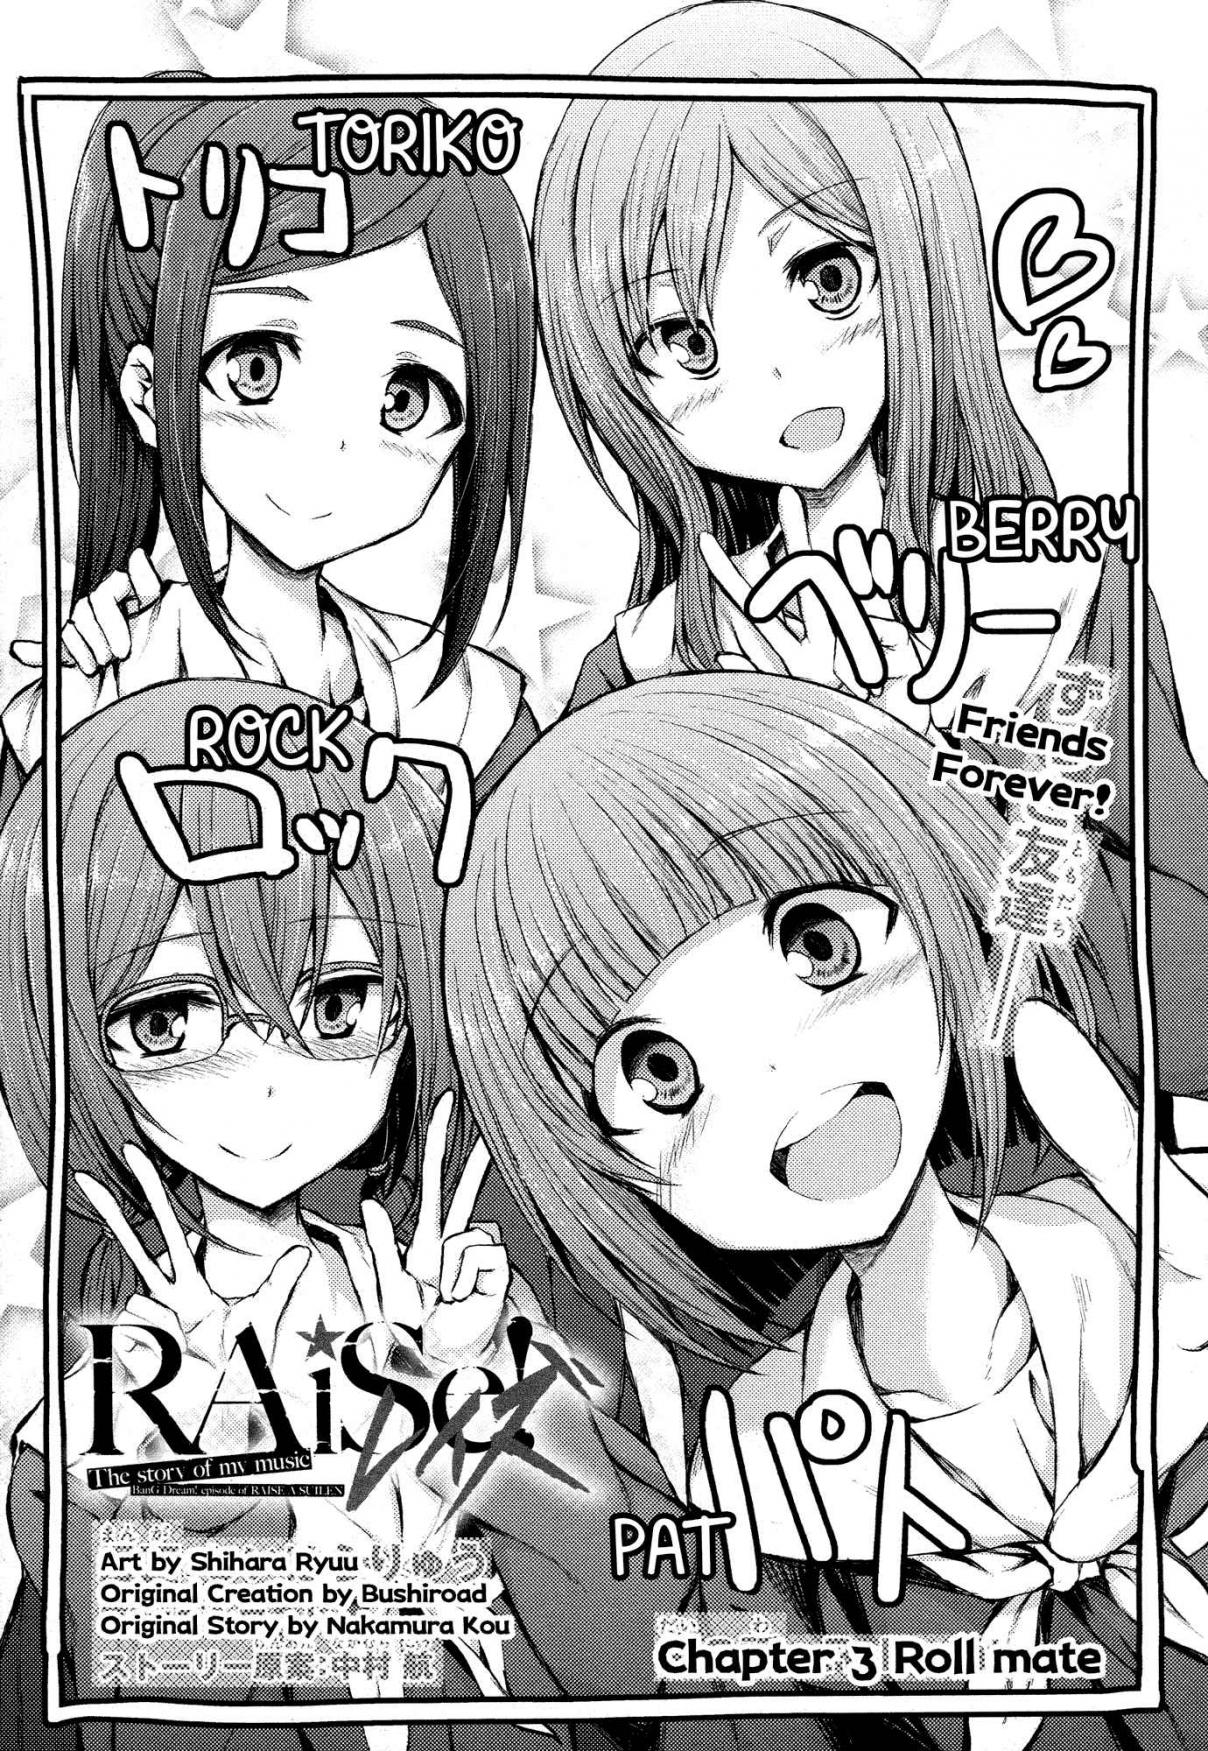 BanG Dream! RAiSe! The story of my music Ch. 3 Roll mate